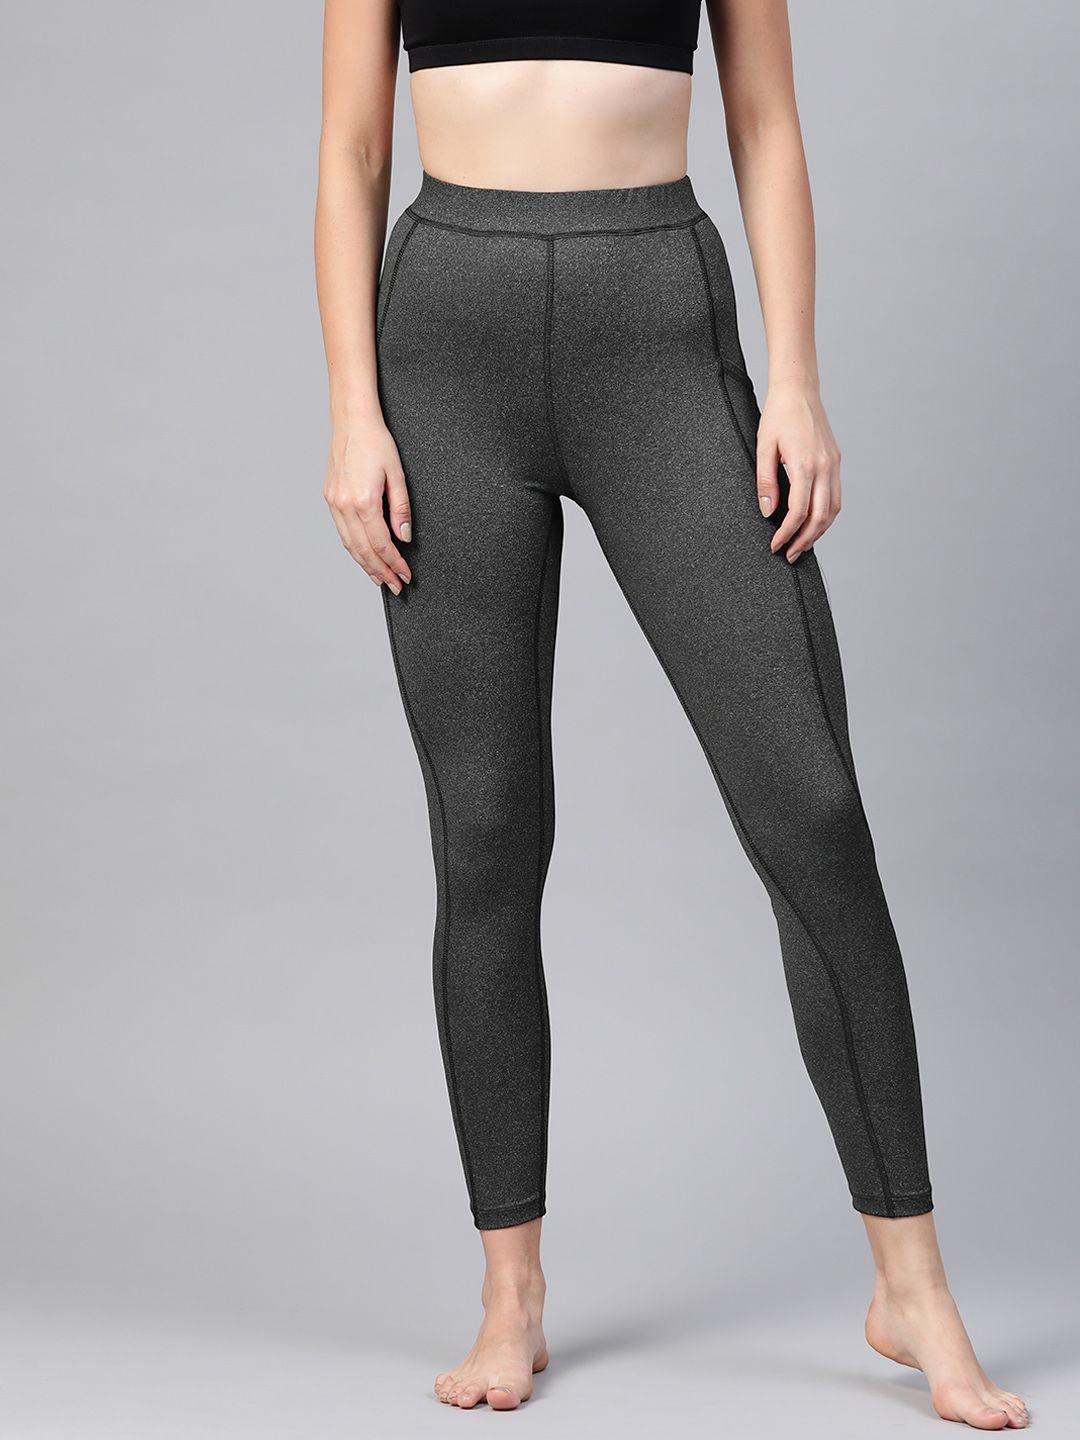 chkokko women charcoal grey solid cropped yoga tights